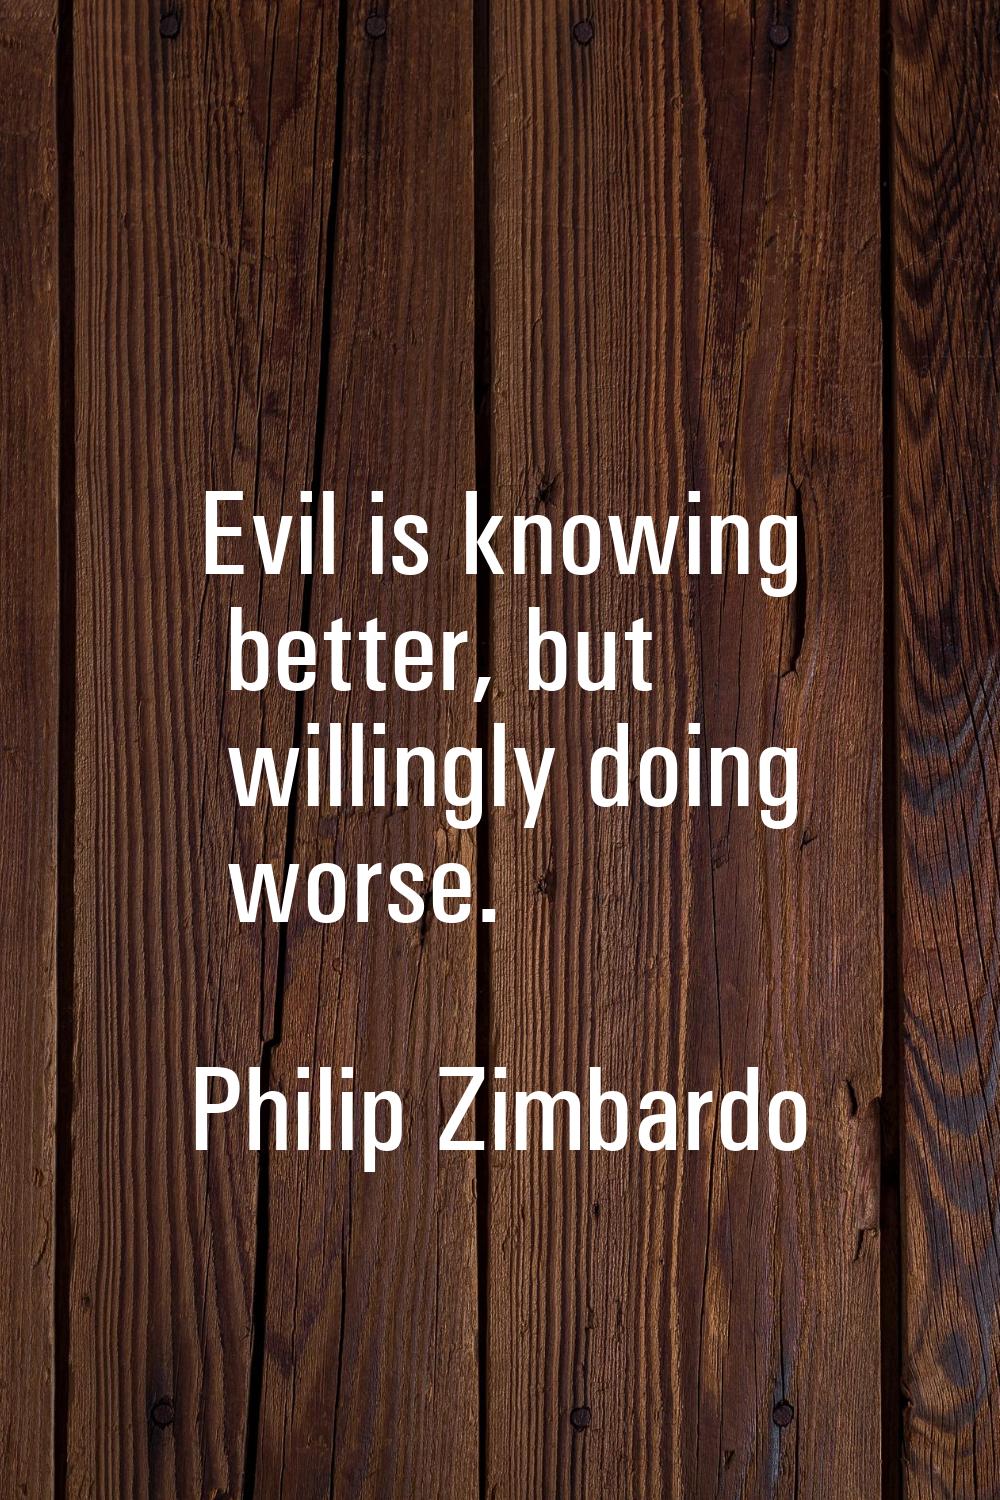 Evil is knowing better, but willingly doing worse.